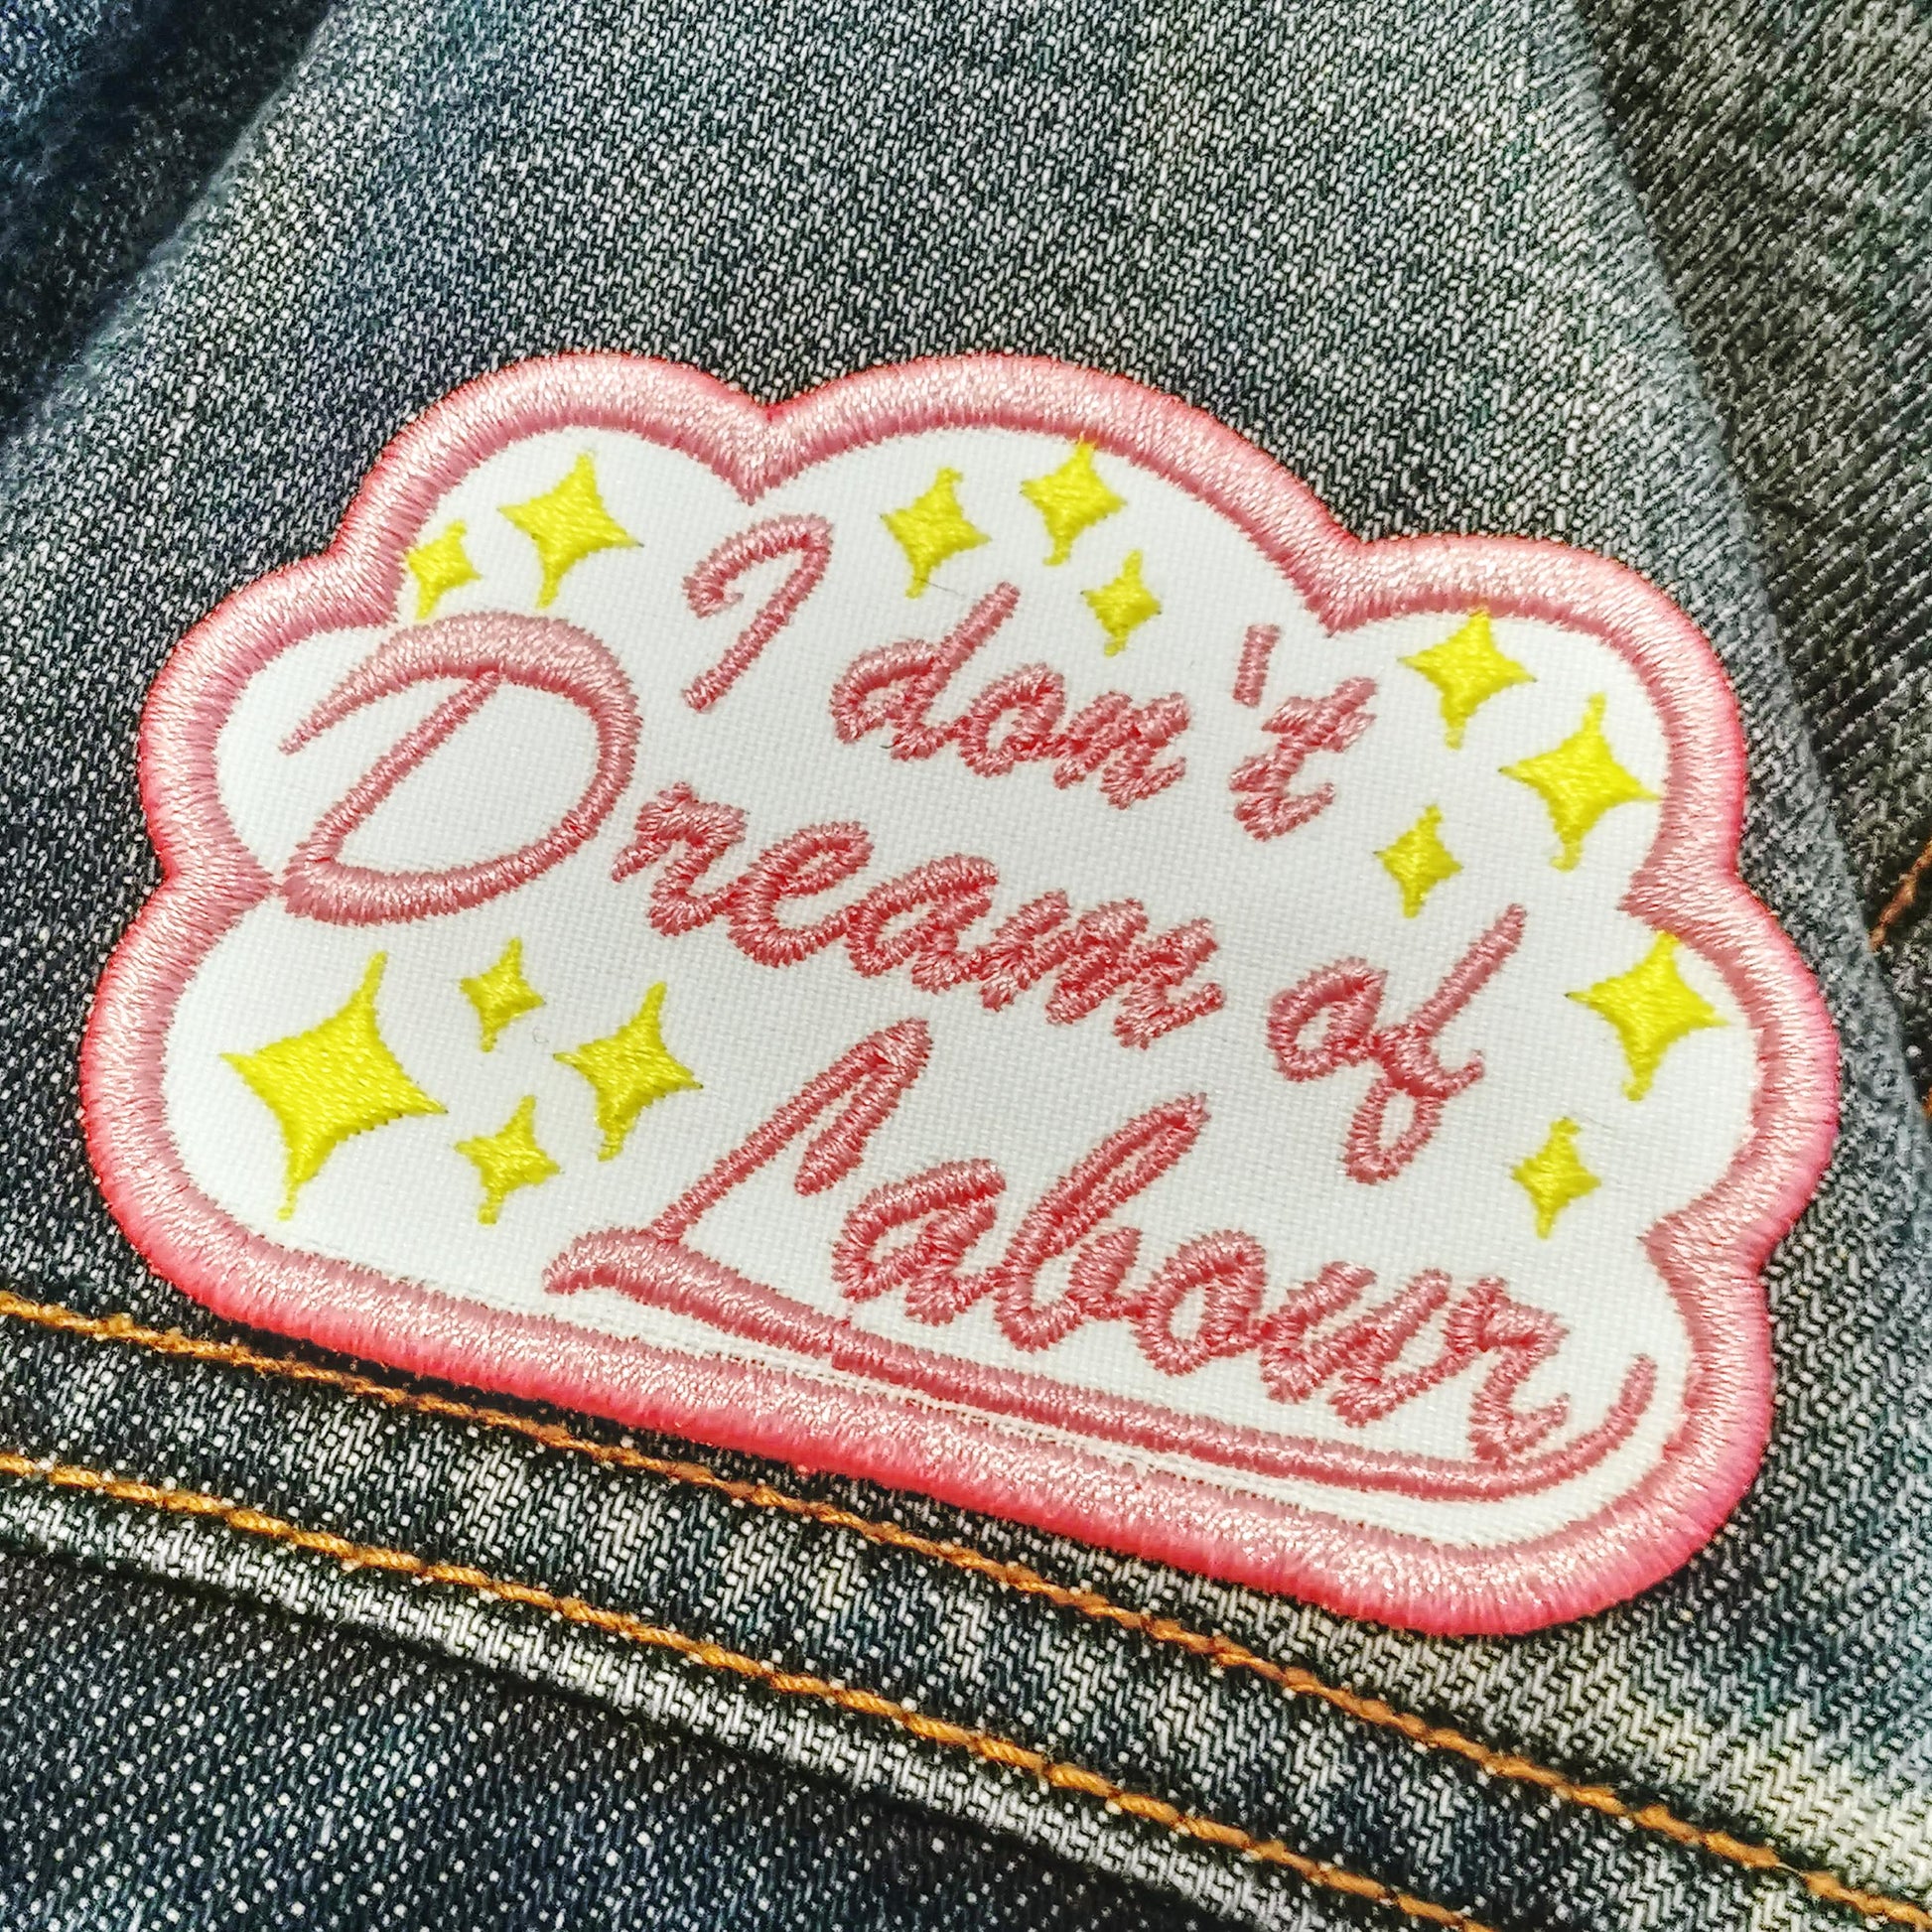 White patch with a cloud that reads "I don't dream of labour"  in pink cursive font with yellow stars